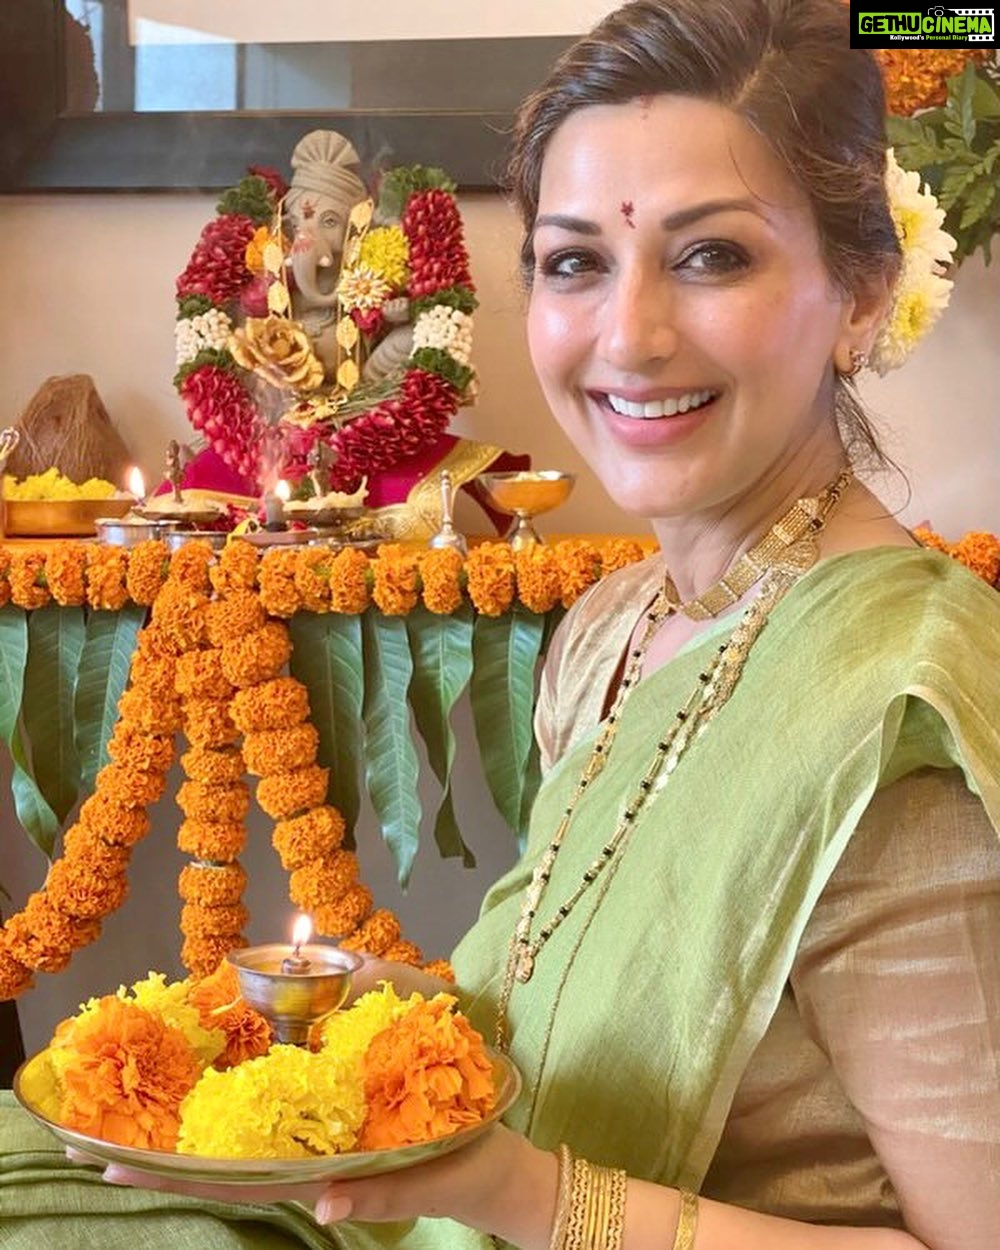 Sonali Bendre Instagram - This year more than ever, with the arrival of Bappa, I hope for new beginnings for everyone! I’m going to miss all the visits from friends & family at home for Bappa’s Darshan. But, I know we’ll find a way to adapt to the current situation yet still retain the true essence of Ganesh Chaturthi. #HappyGaneshChaturthi गणेश चतुर्थी च्या हार्दिक शुभेच्छा गणपती बाप्पा मोरया 🙌🏼